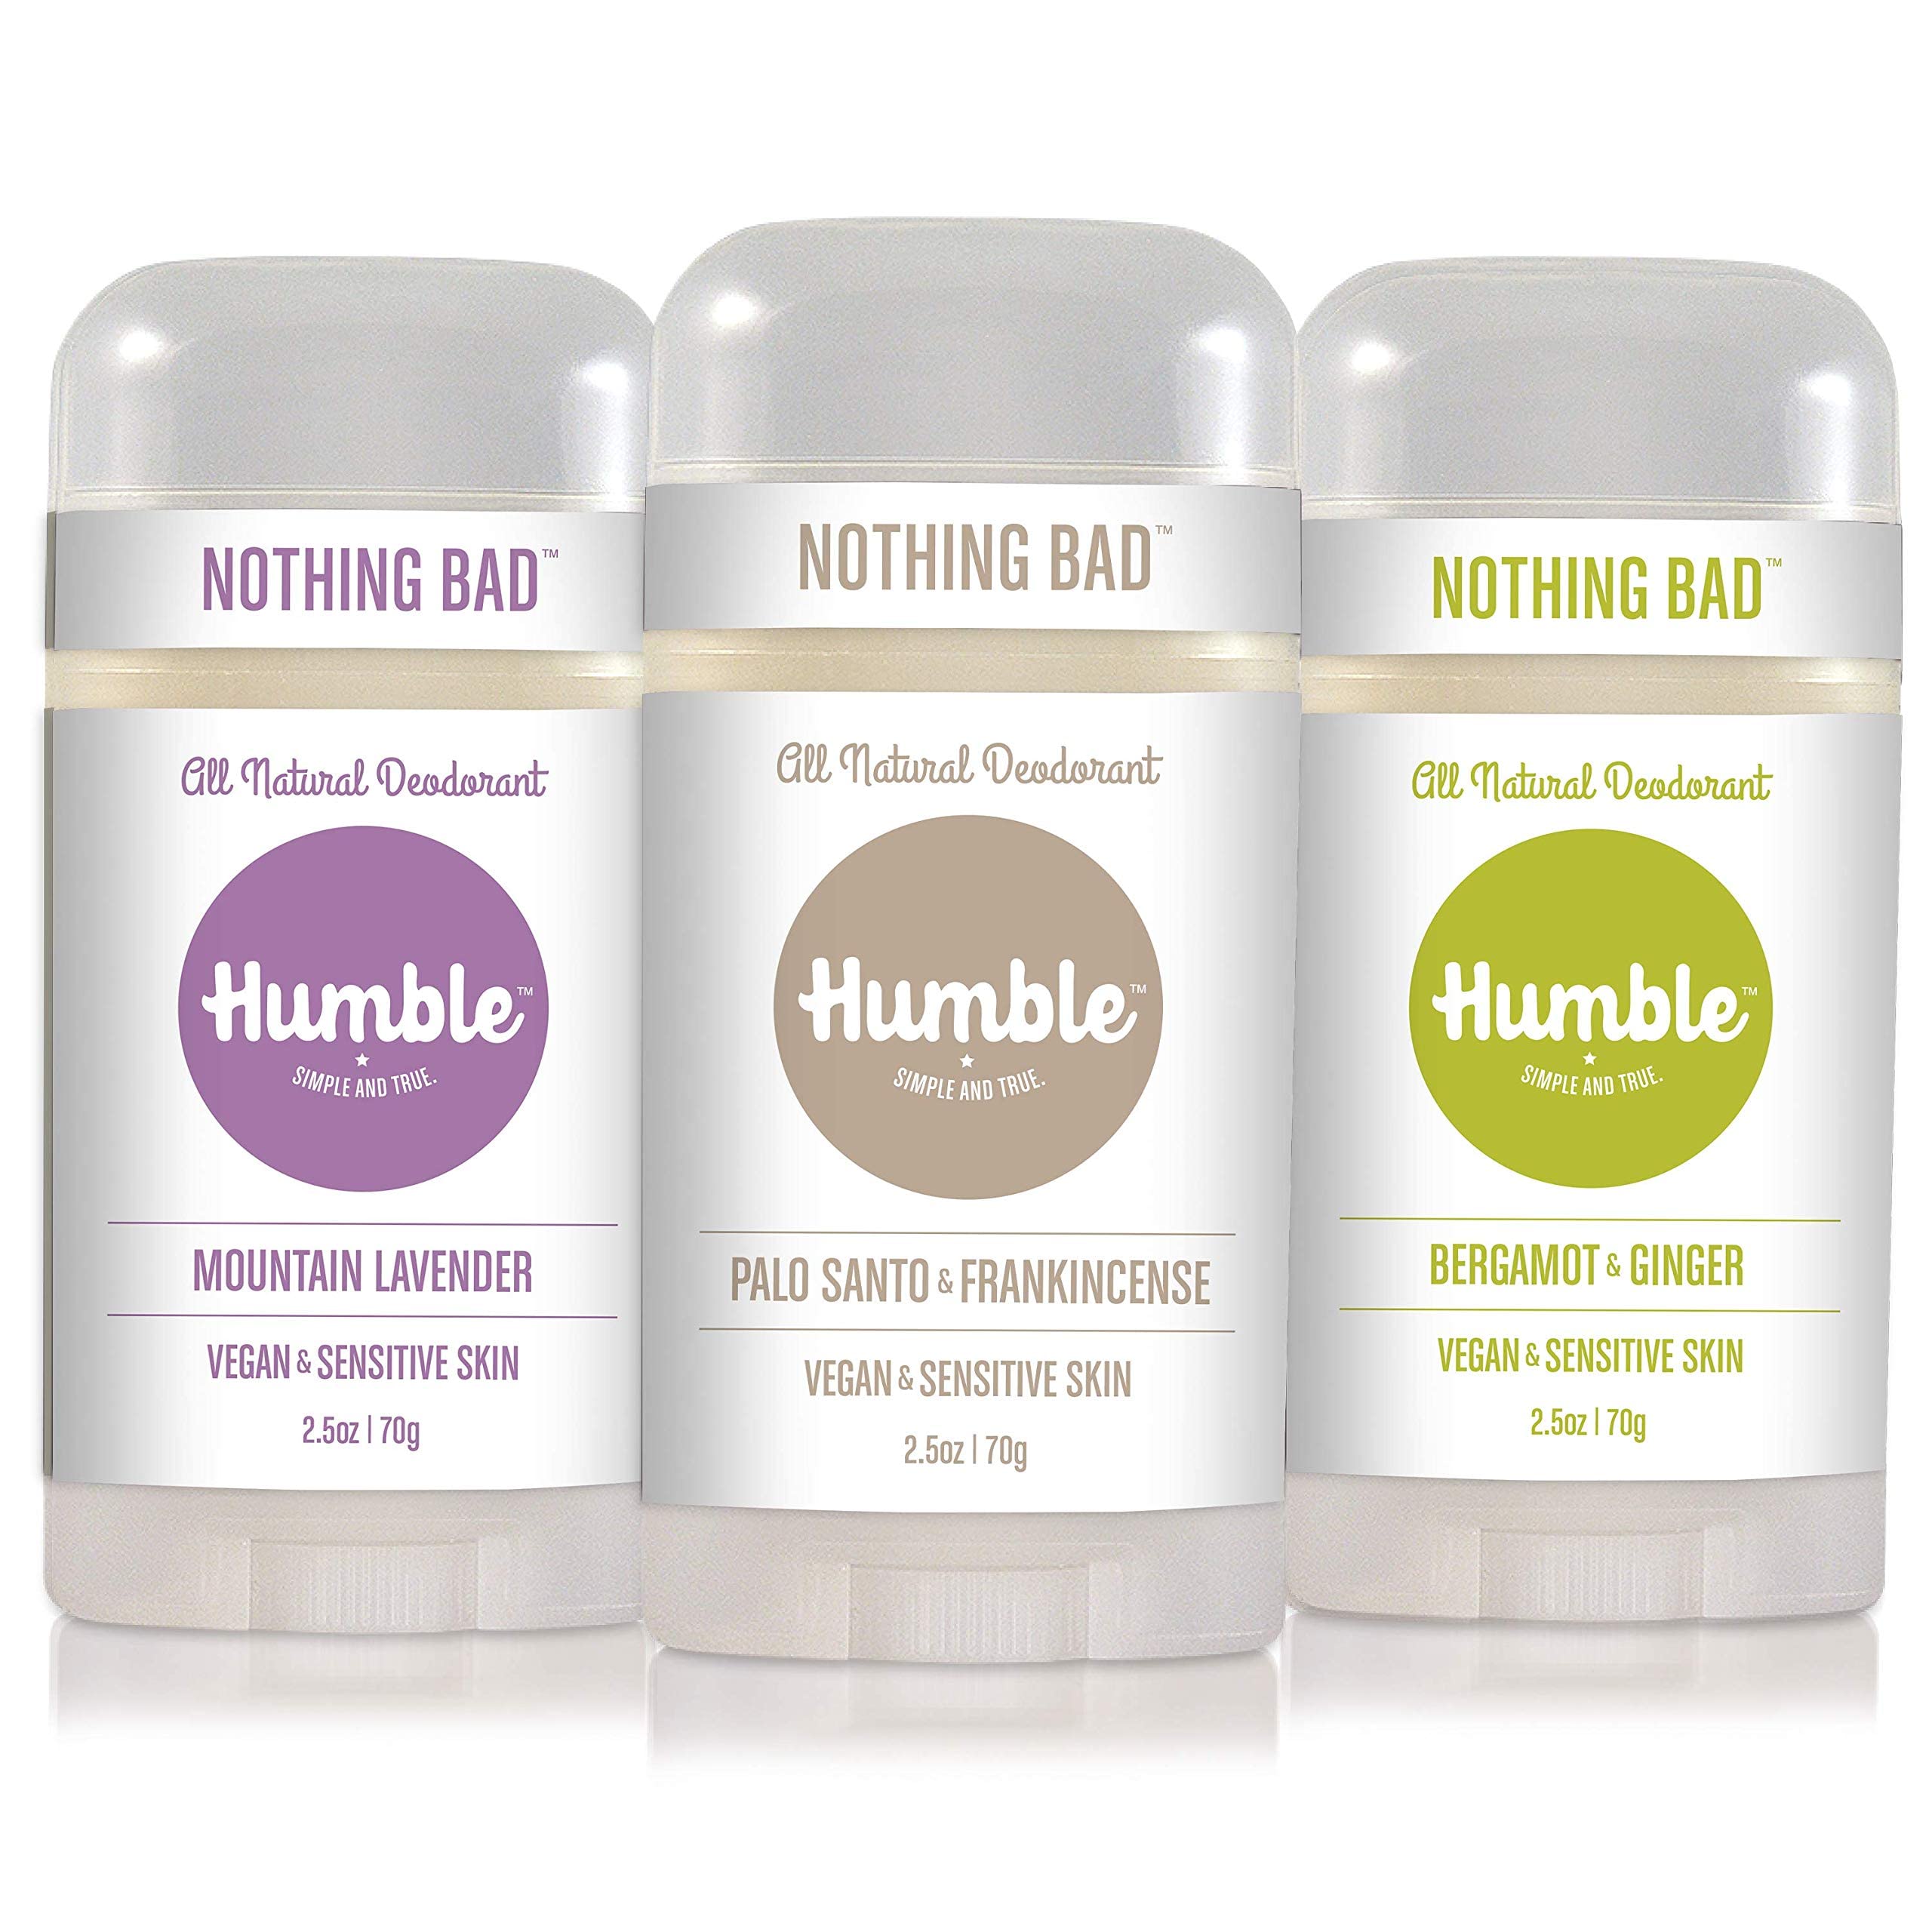 HUMBLE BRANDS Vegan Deodorant Sensitive Skin Trio with Palo Santo & Frankincense, Mountain Lavender, and Bergamot & Ginger, 2.5 Ounce (Pack of 3)